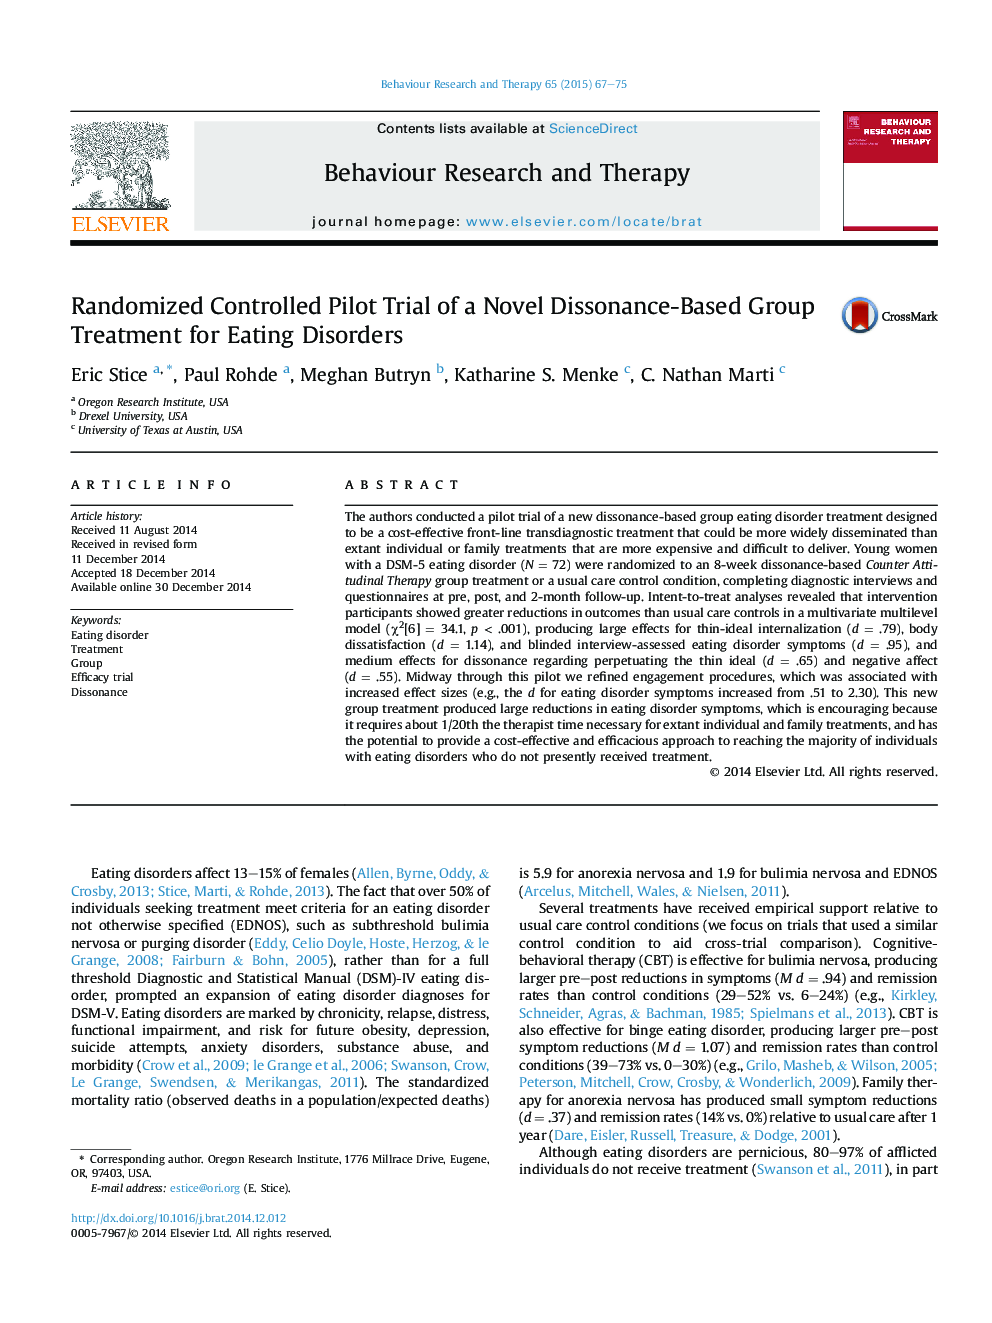 Randomized Controlled Pilot Trial of a Novel Dissonance-Based Group Treatment for Eating Disorders